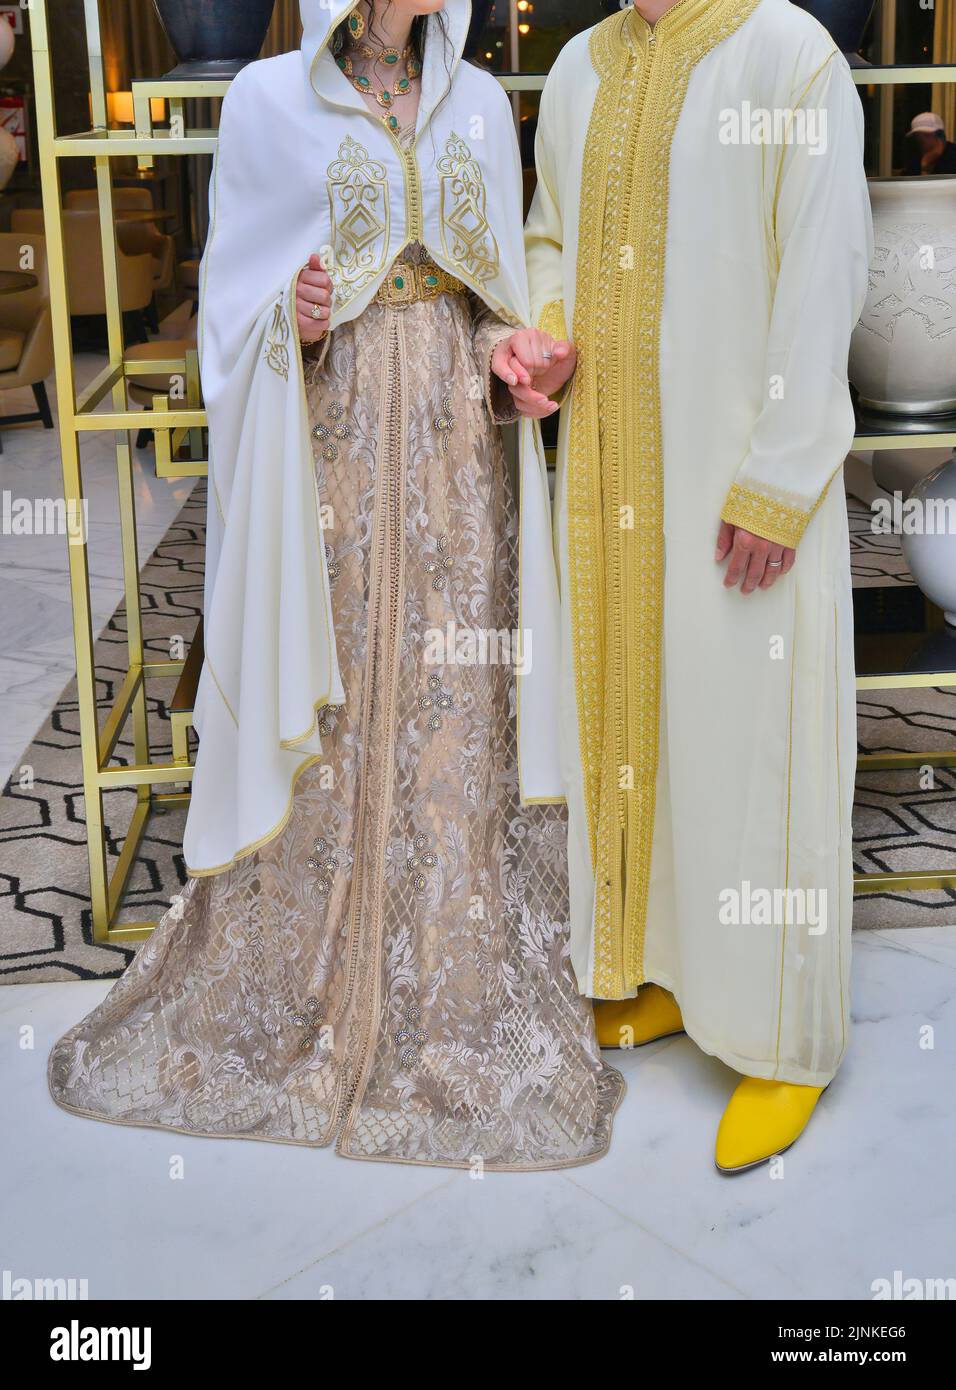 Moroccan wedding. A groom wearing a djellaba holds his bride who is wearing a traditional Moroccan caftan Stock Photo